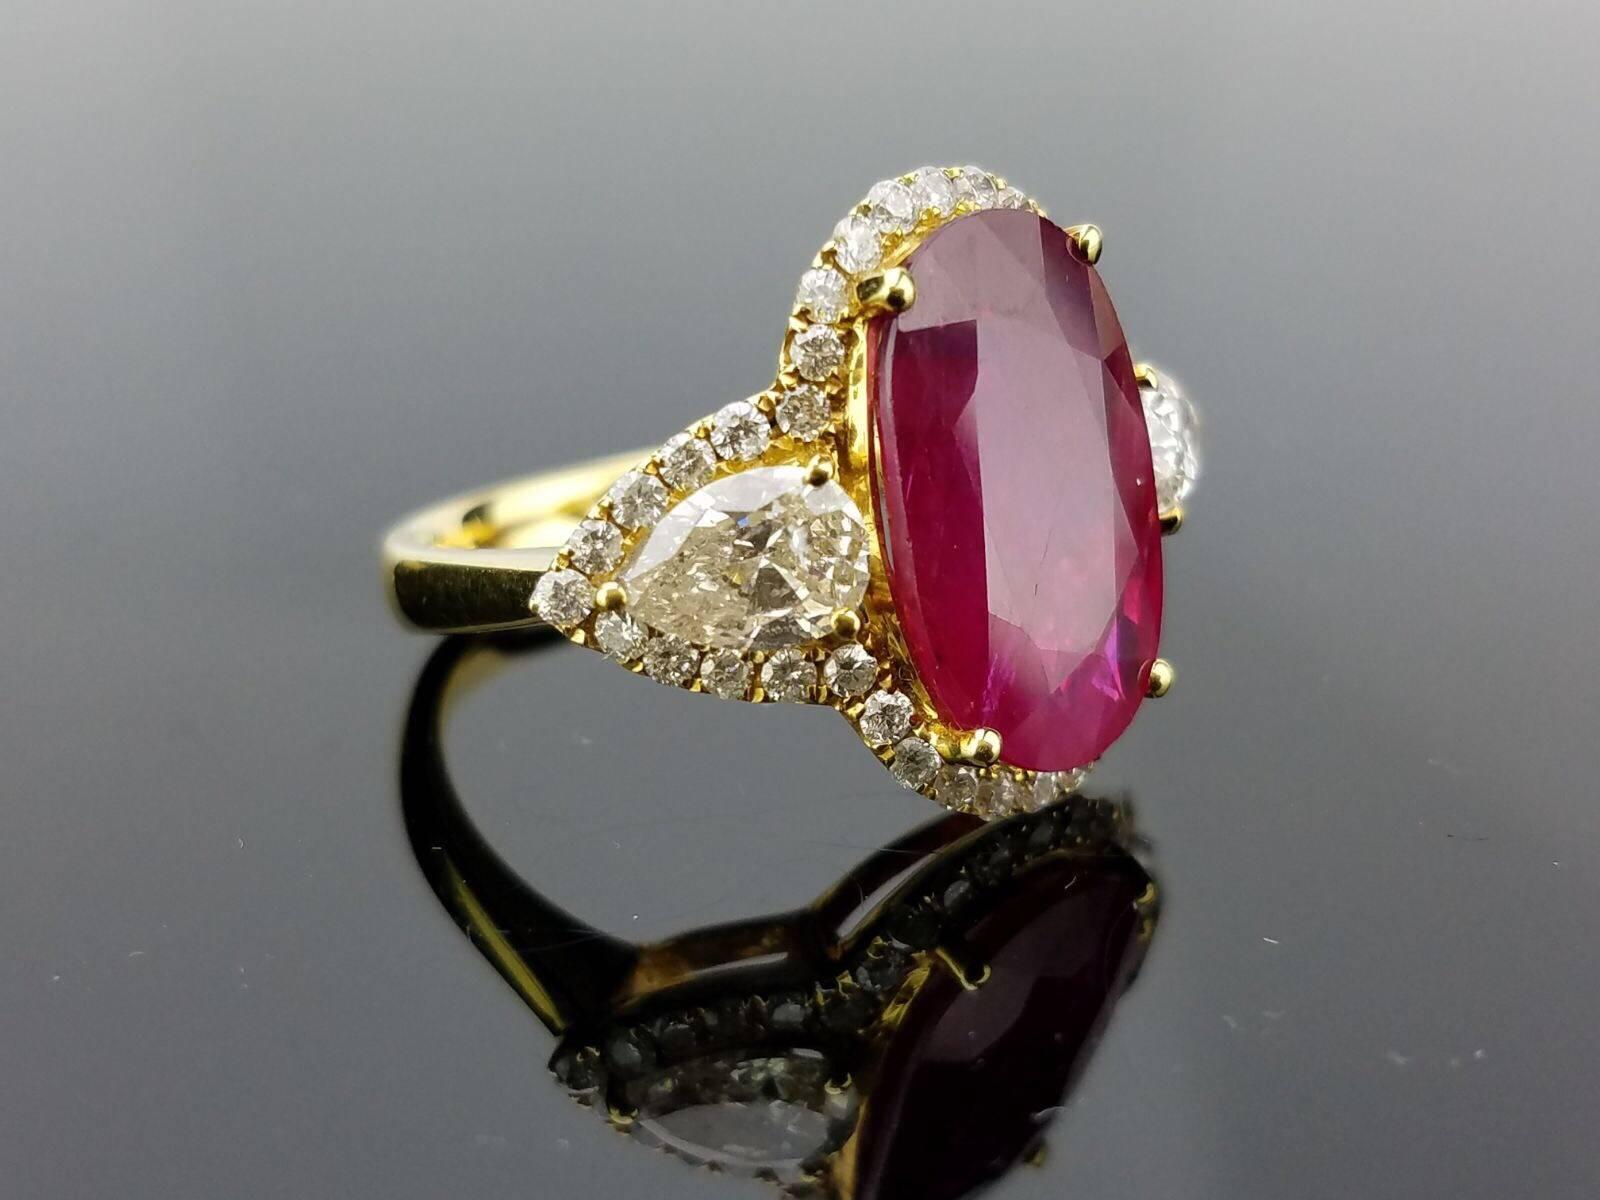 Beautiful Ruby ring with pear shaped white Diamond side stones, and brilliant cut Diamond. All set in 18K yellow gold.

Stone Details:  
Stone: Mozambique Ruby 
Cut: Oval
Carat Weight: 5.87 Carat  

Diamond Details: 
Cut: Brilliant cut / Pear